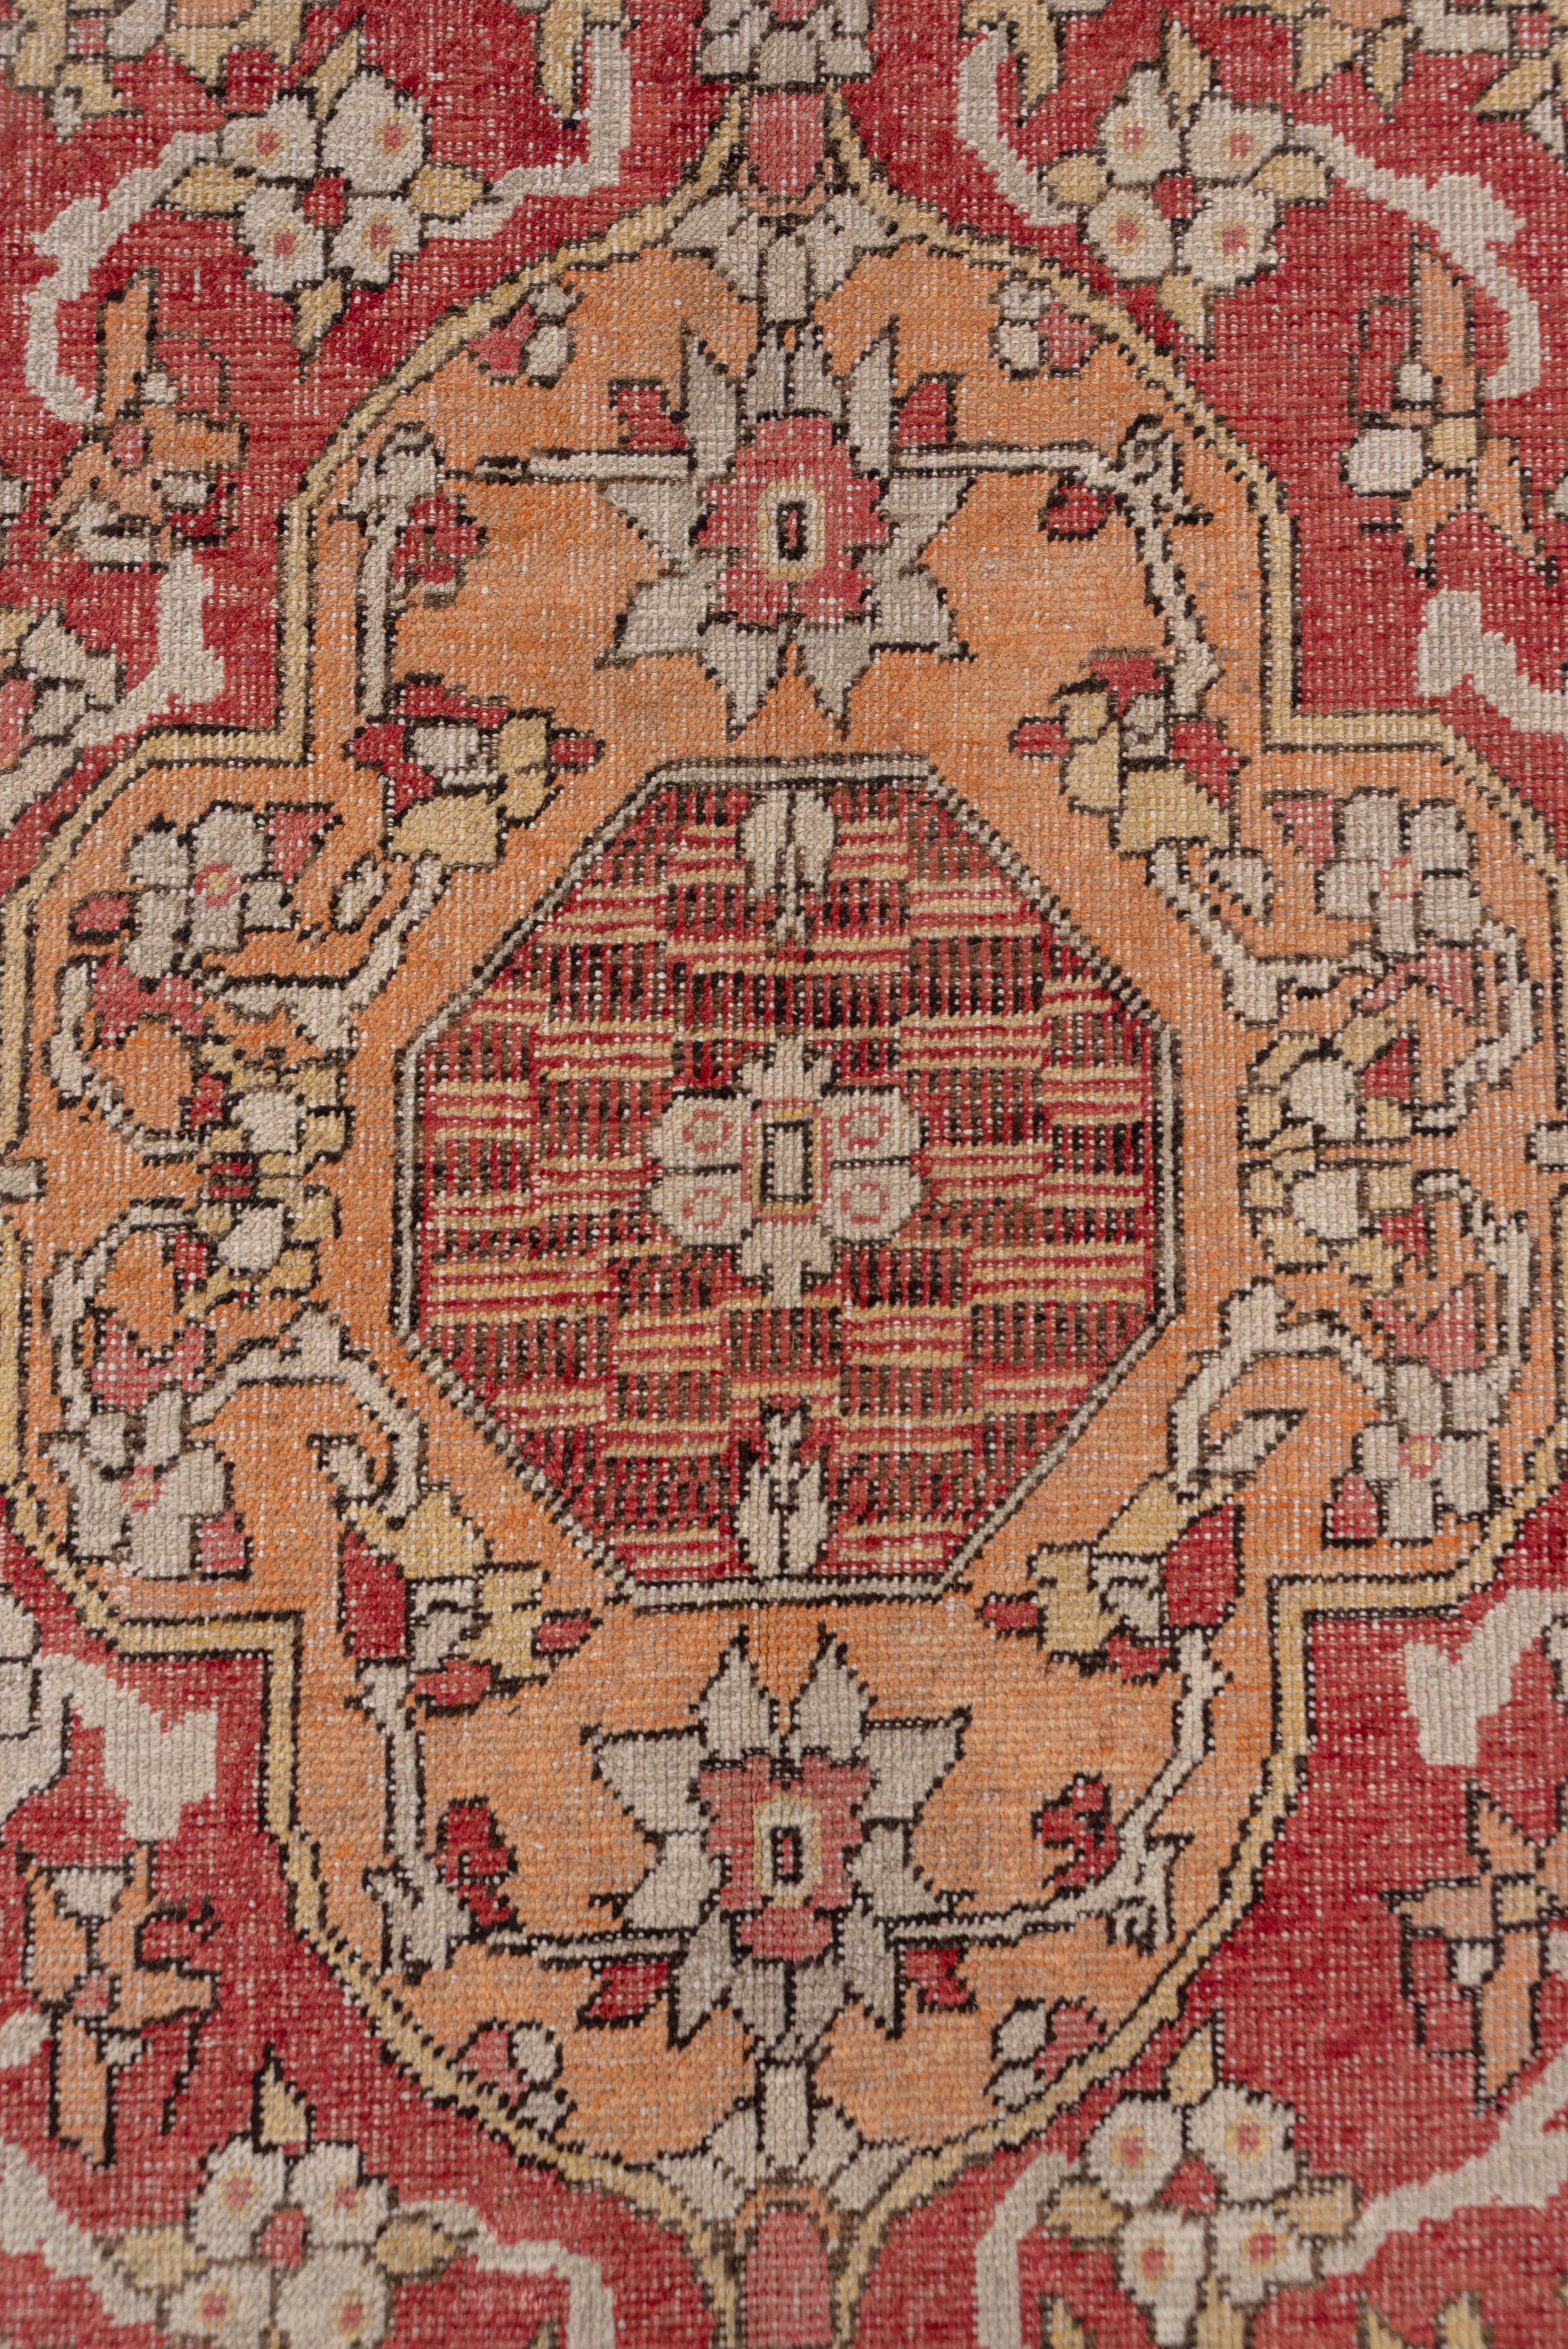 Hand-Knotted Antique Turkish Red Oushak Rug, Shabby Chic, Distressed, Red and Ivory Field For Sale